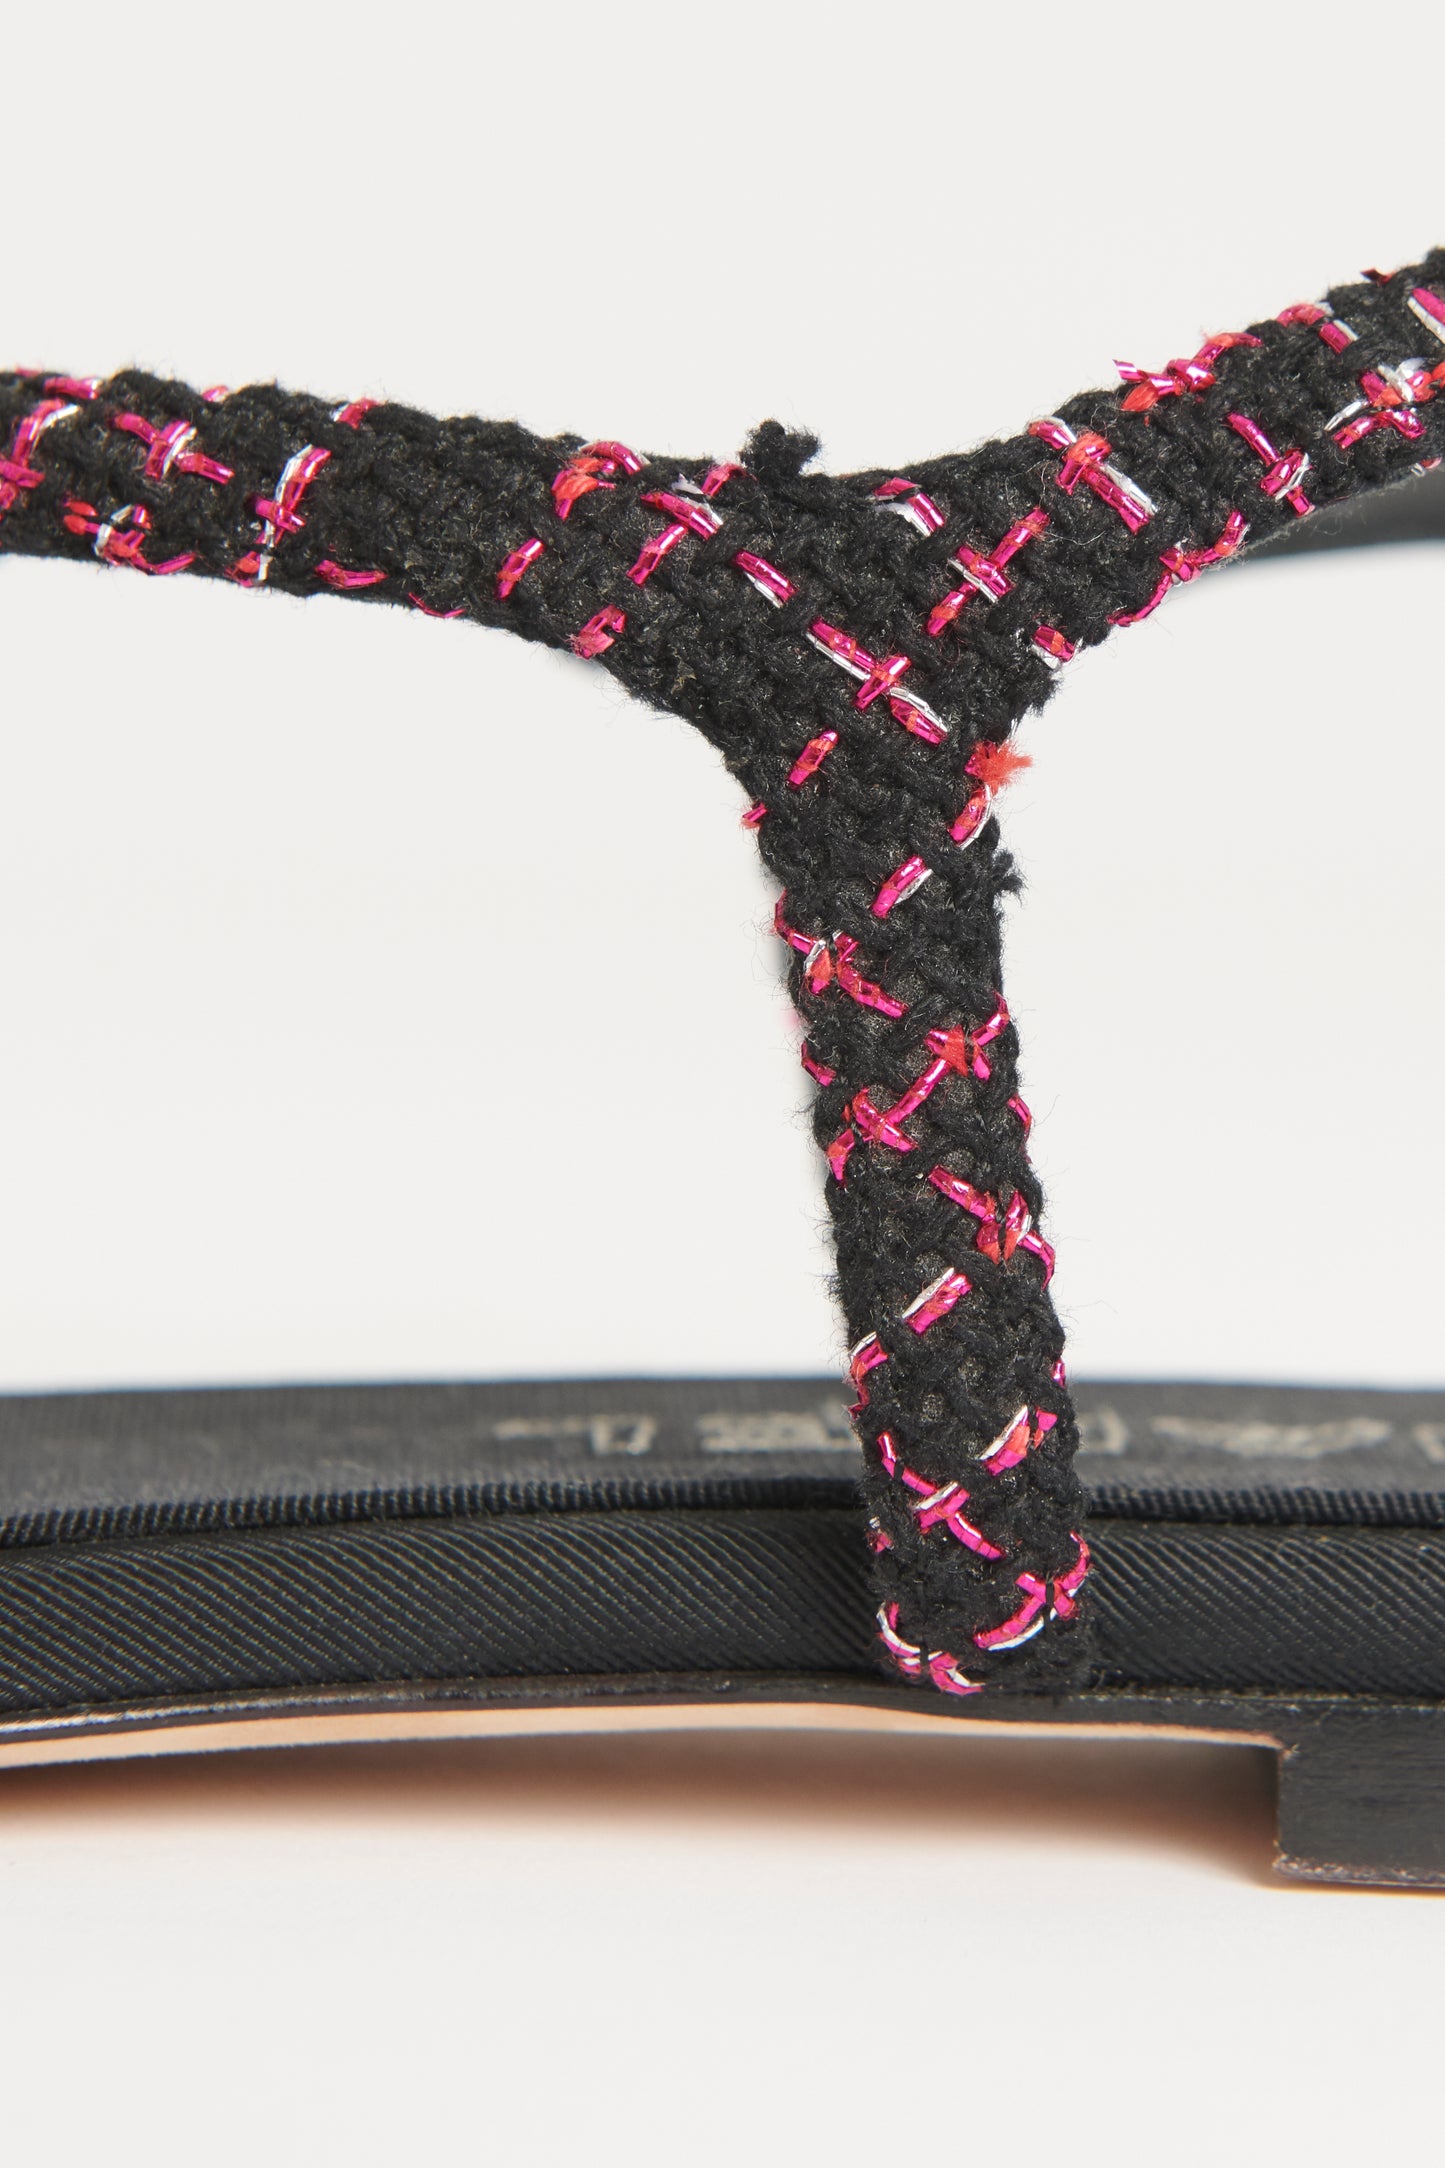 Black/Magenta Tweed Preowned Sandals With Camellia Detail